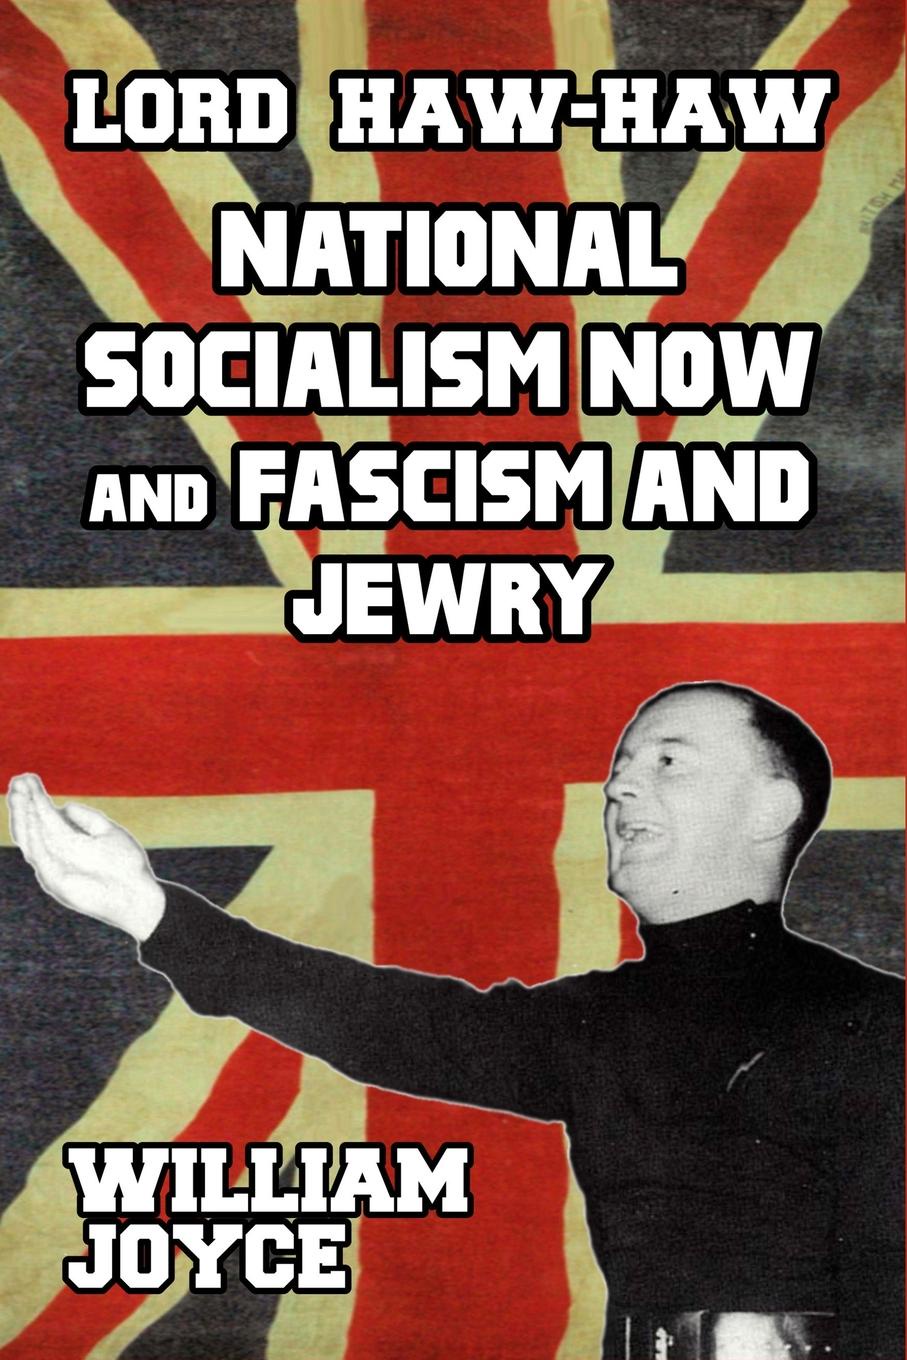 Lord Haw Haw National Socialism Now and Fascism and Jewry